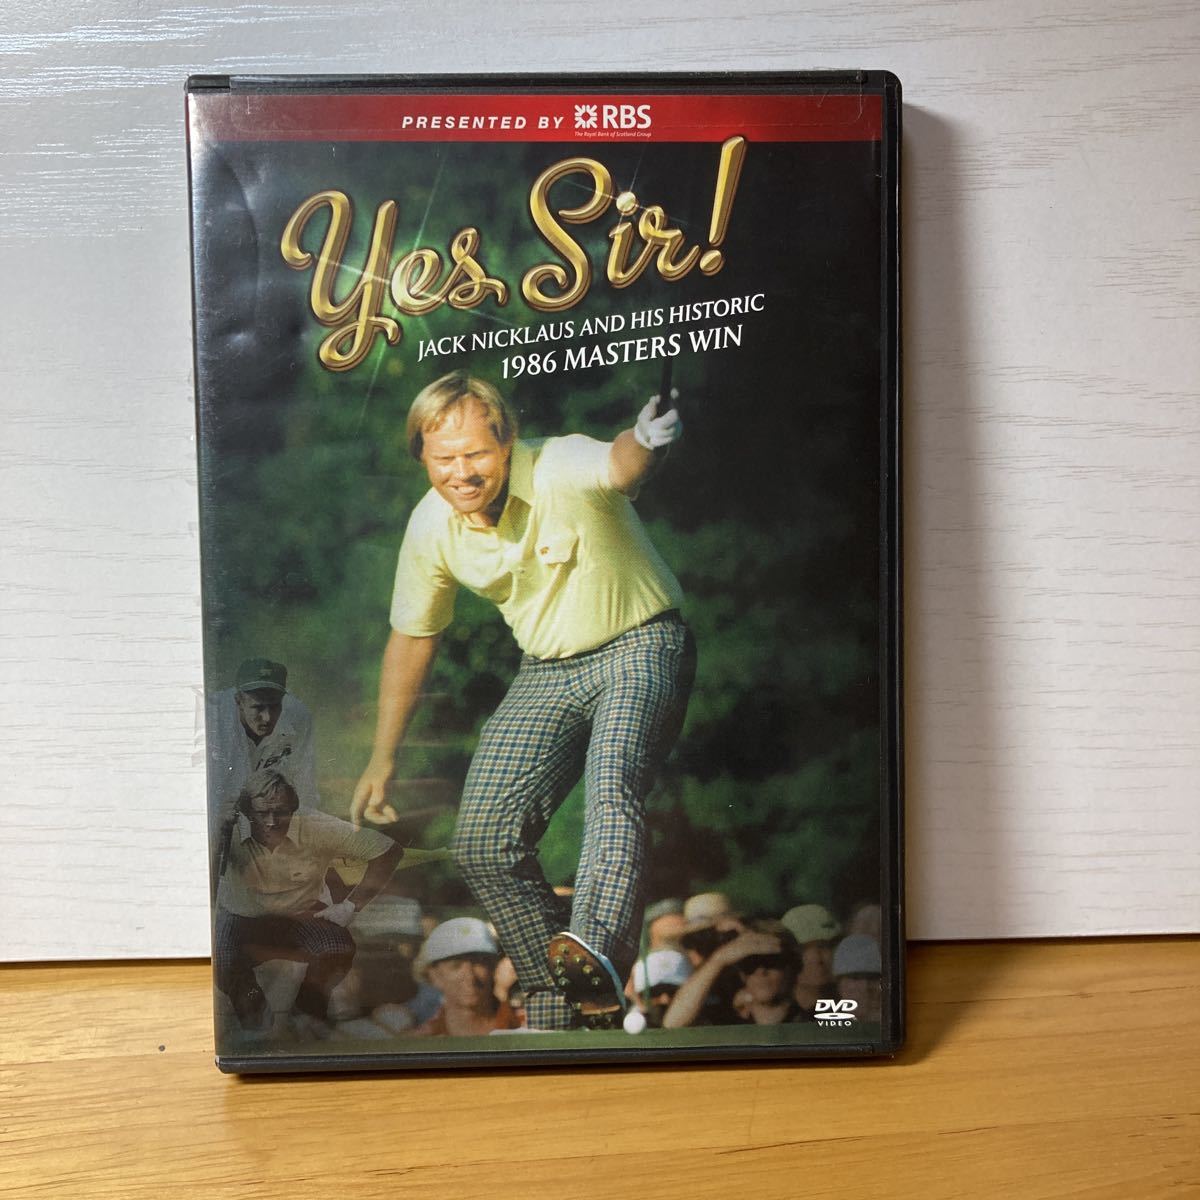 Jack Nicklaus and his historical 1986 Masters win DVD ジャック・ニクラウス　1986 マスターズ_画像1